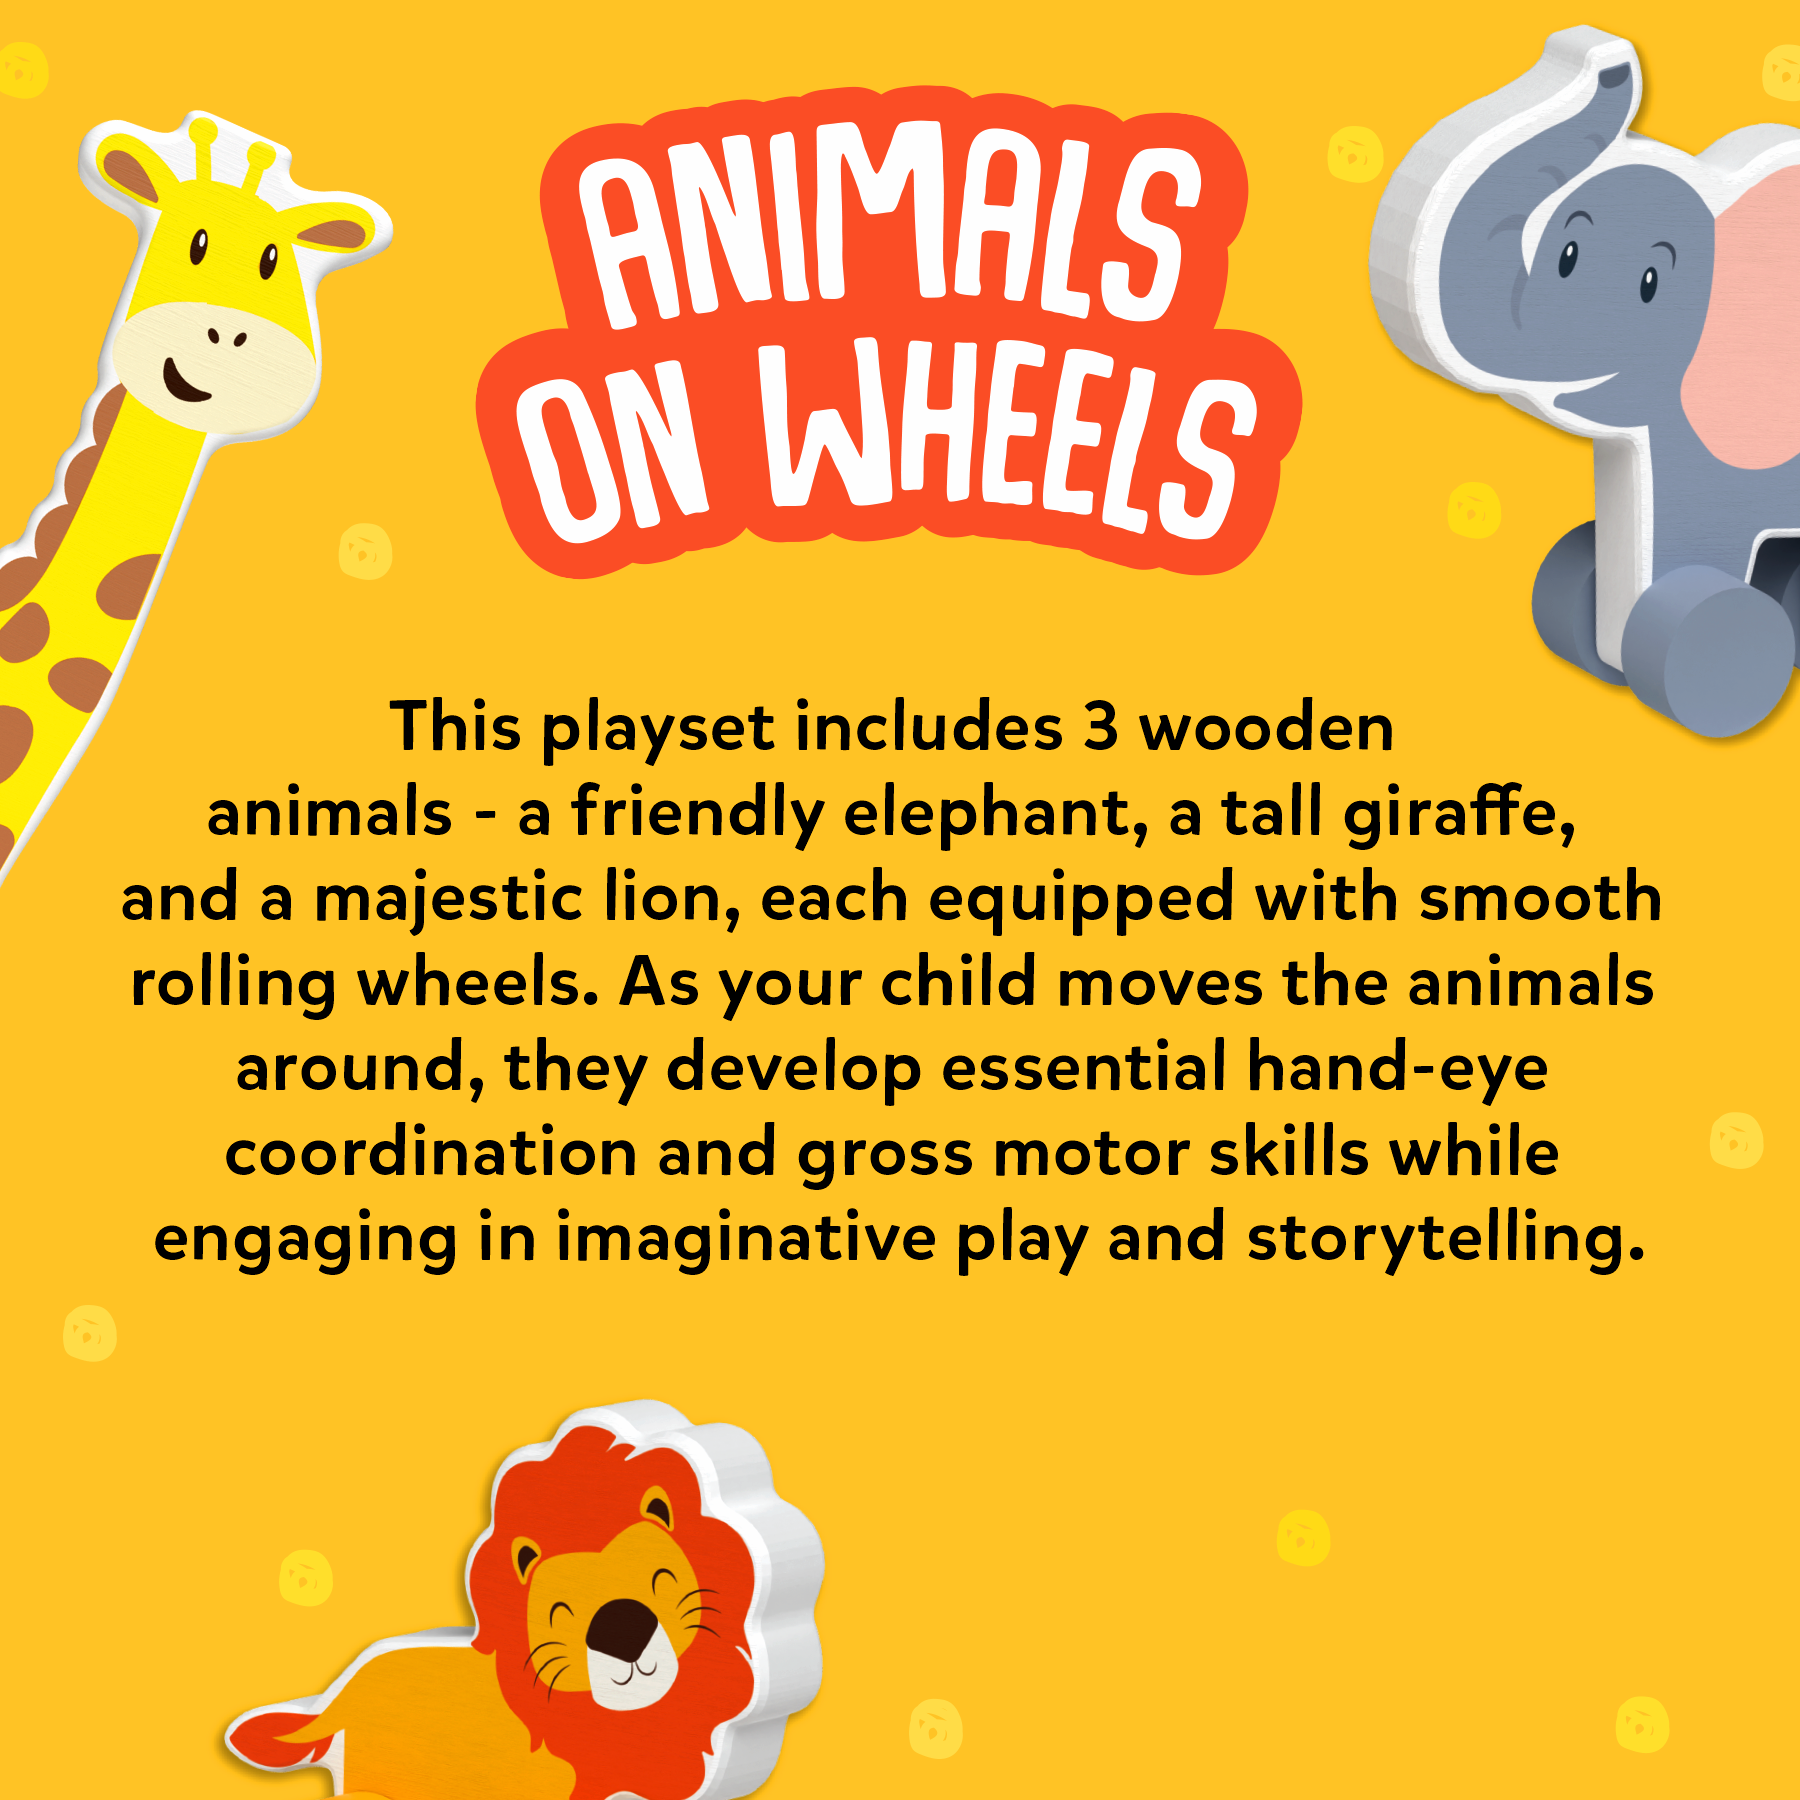 Skillmatics Wooden Animal Toys on Wheels, Imaginative Play for Toddlers, Educational Gifts for Infants 9 Months to 3 Years